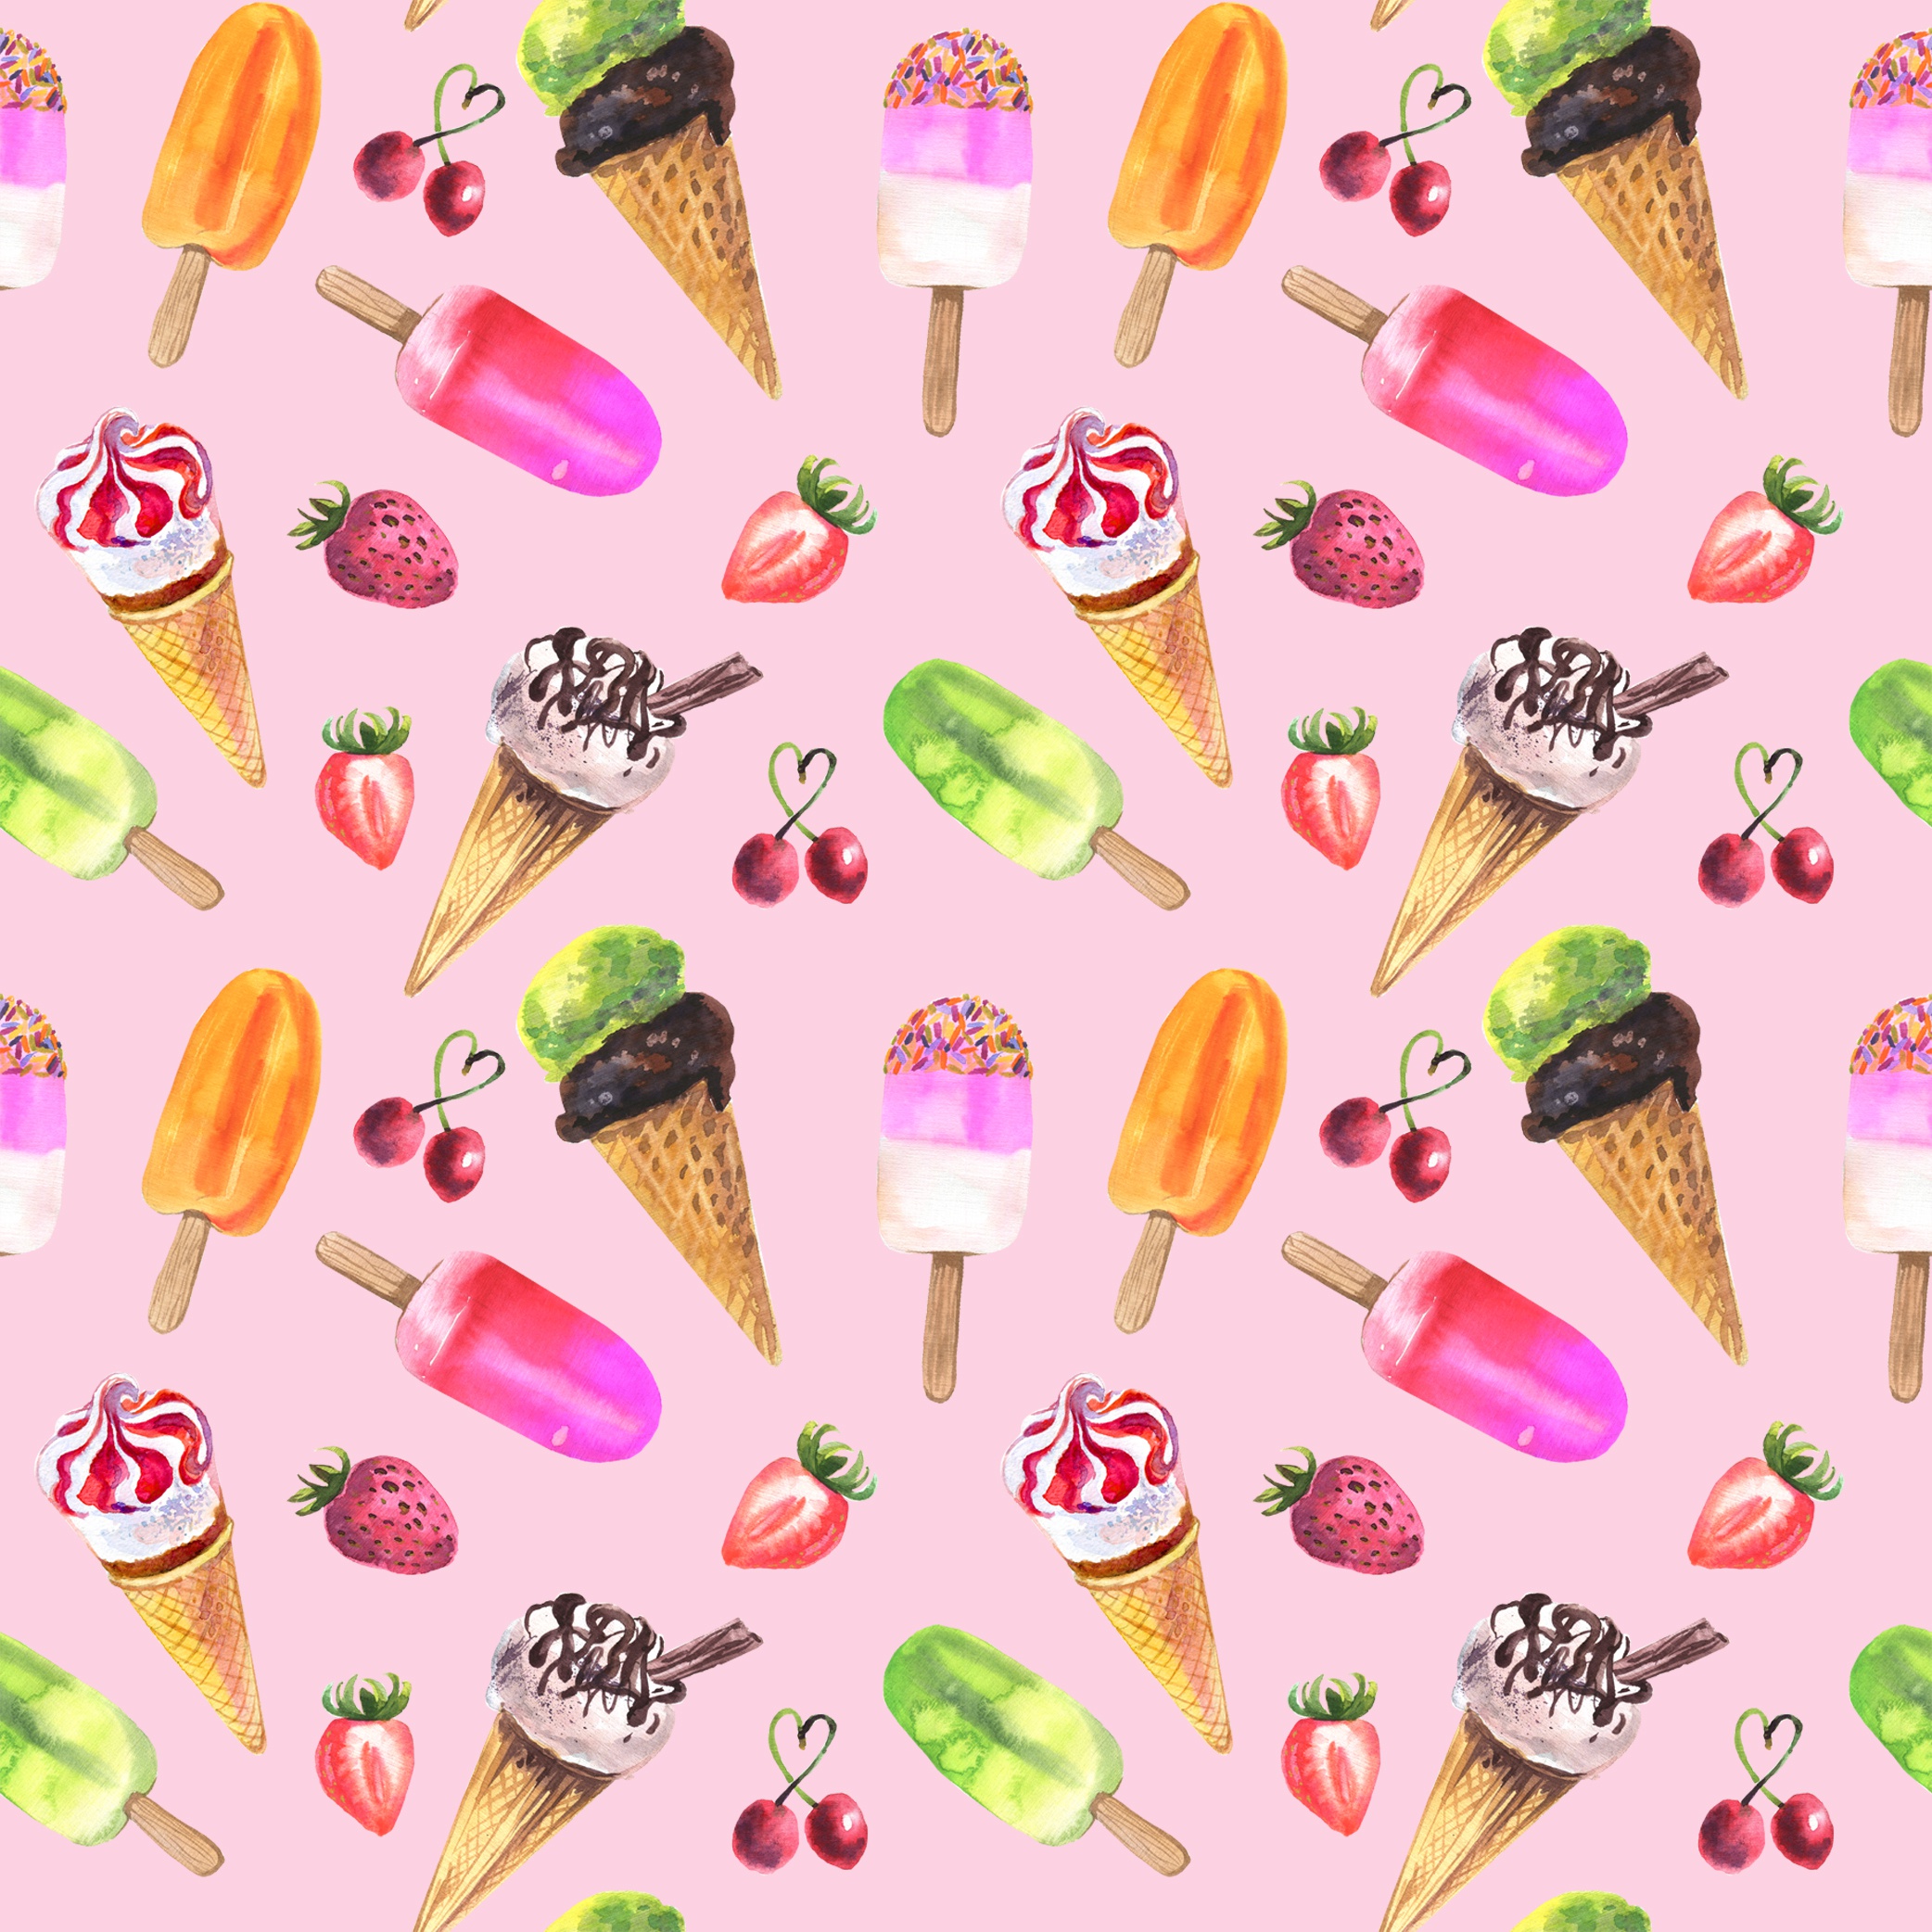 General 2084x2084 texture pattern food pink background ice cream